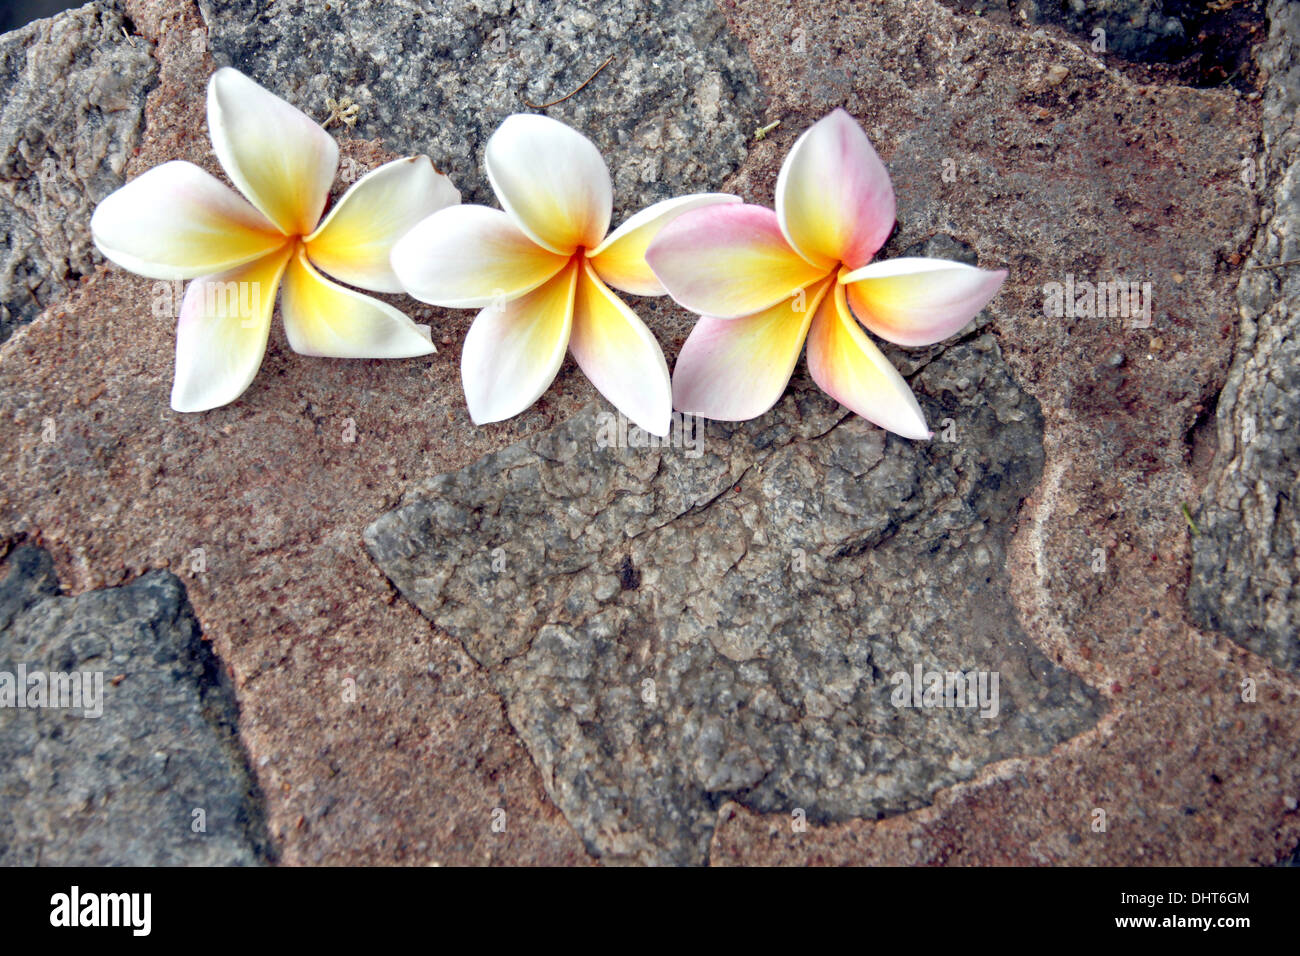 The Picture focus Frangipani flowers are yellowish white on stone Background. Stock Photo